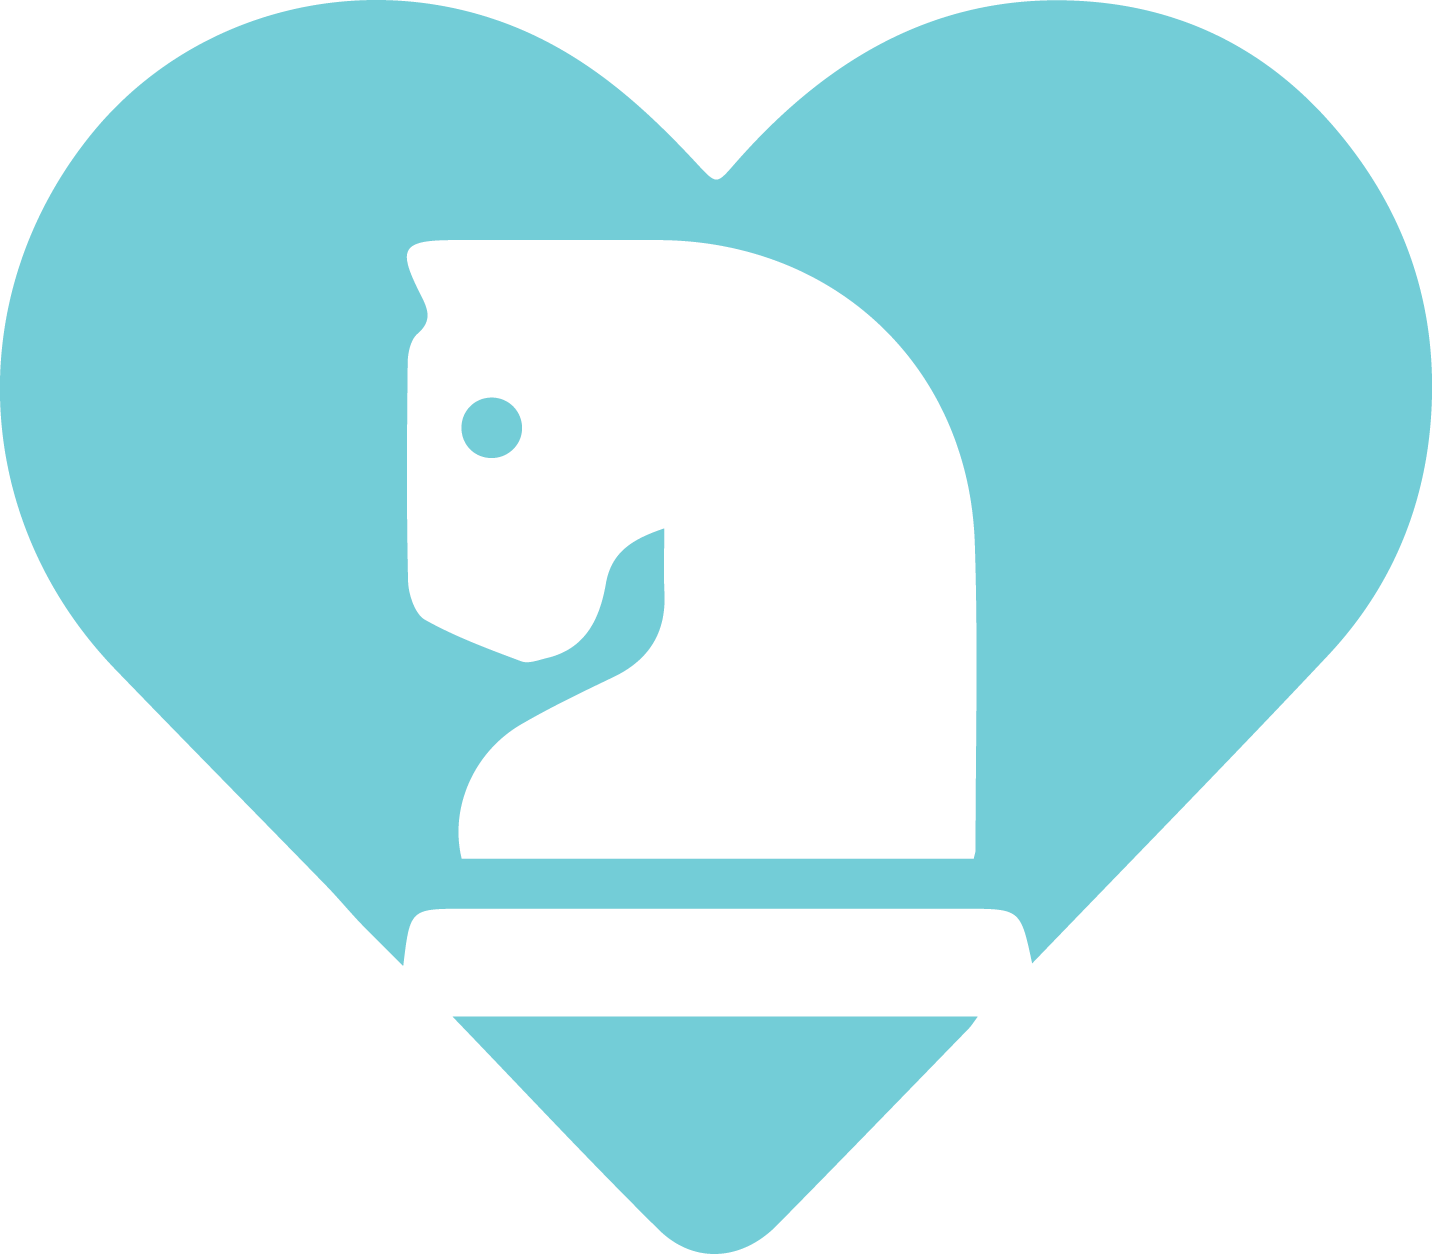 White knight chess piece in a light blue heart